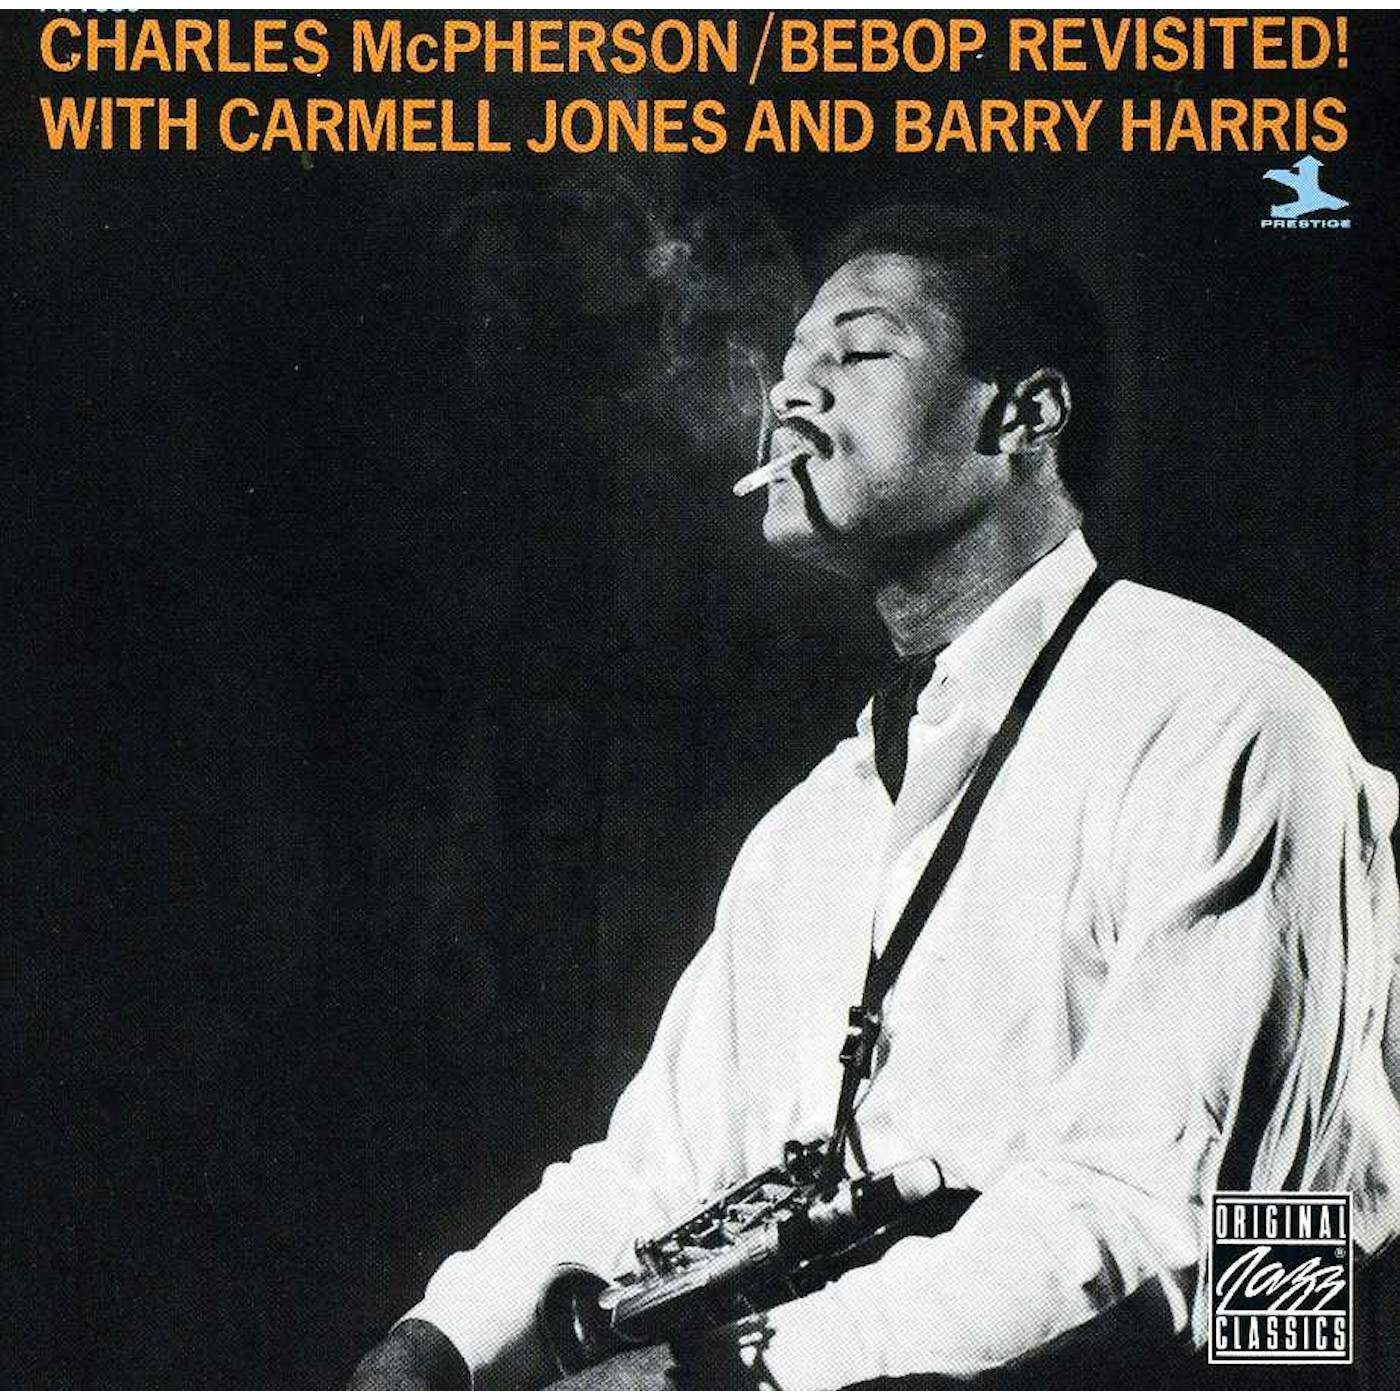 Charles McPherson BE BOP REVISITED CD